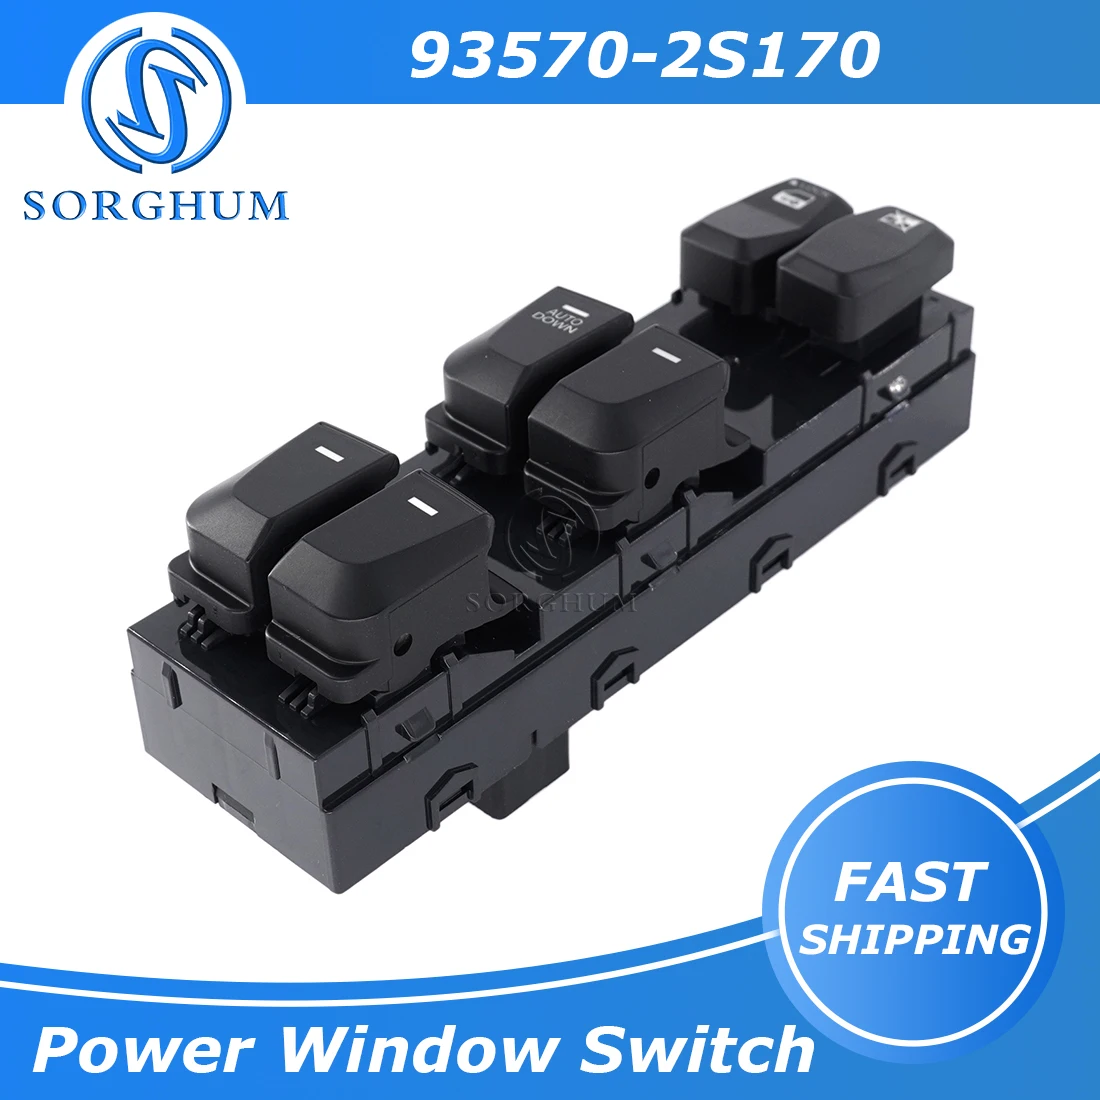 

Sorghum Auto Down 16 Pins Left Driver Side Electric Power Window Switch Button 93570-2S170 For Hyundai Tucson iX IX35 2010-2017